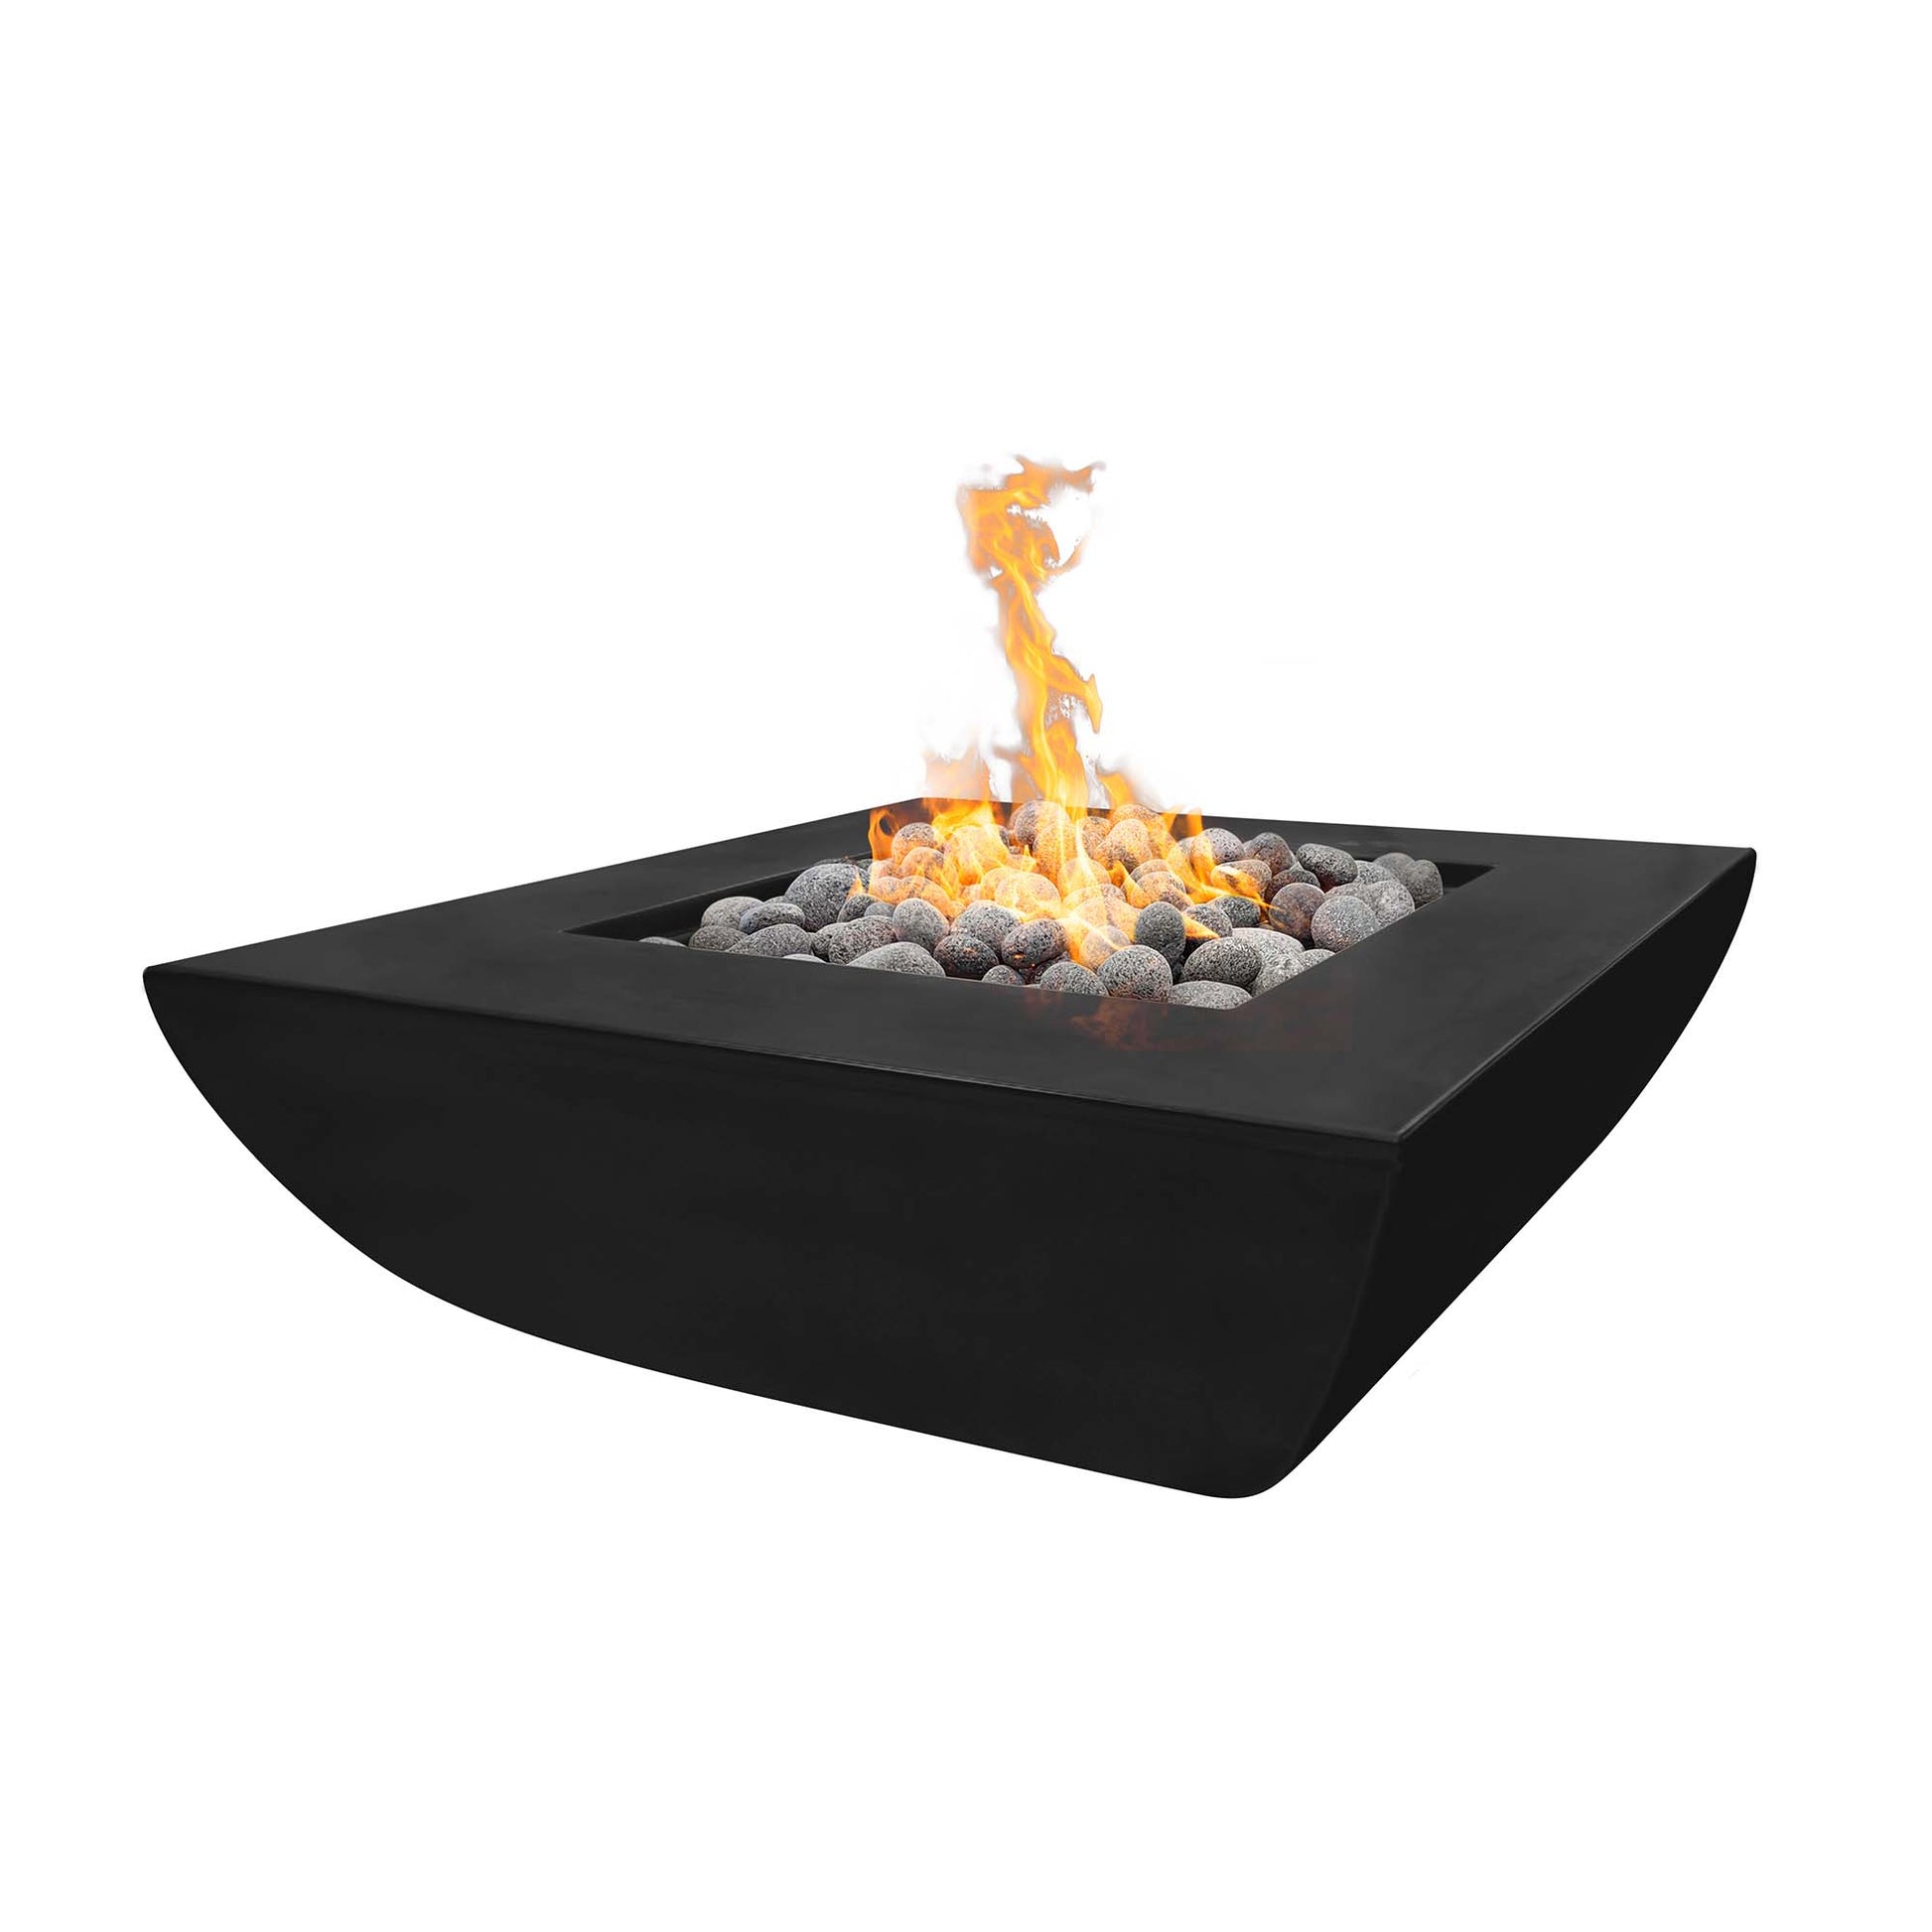 The Outdoor Plus Square Avalon 42" Metallic Pearl GFRC Concrete Liquid Propane Fire Pit with 12V Electronic Ignition